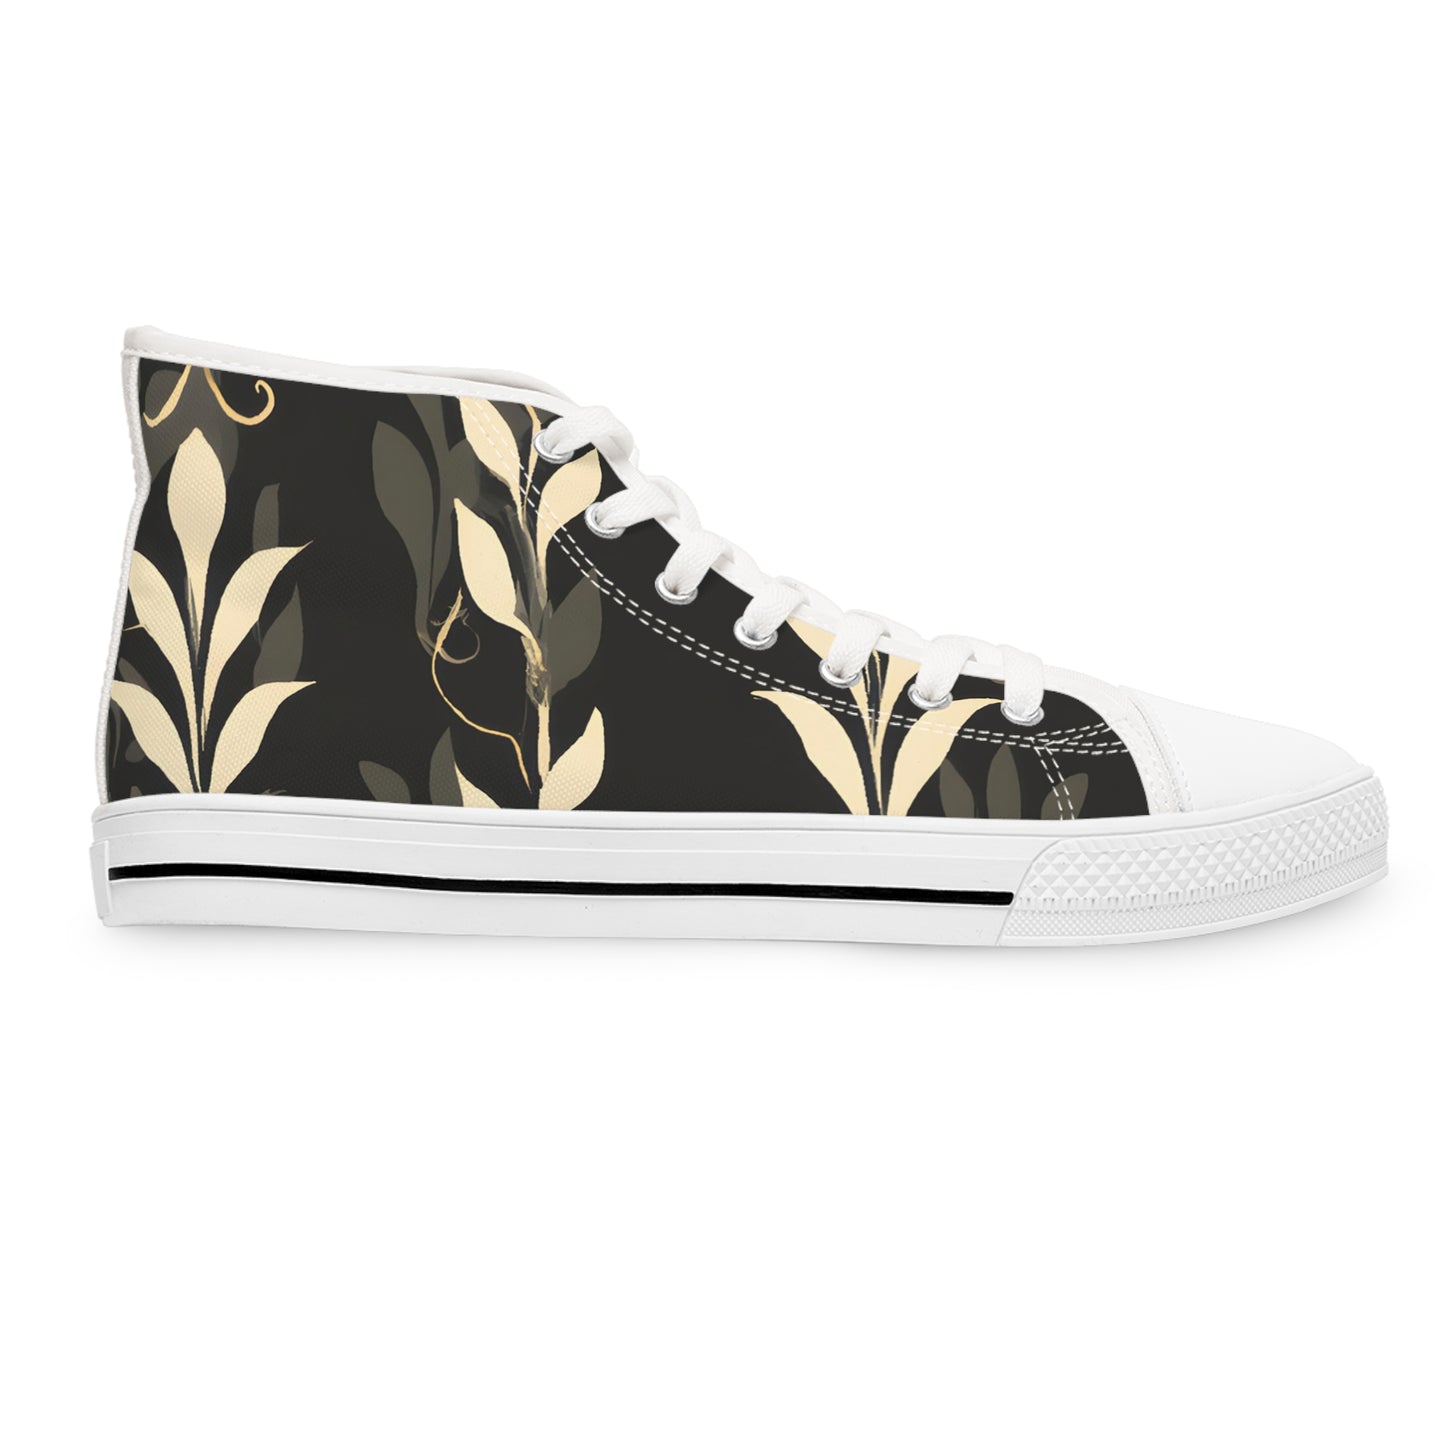 Iristo Evelynne - Women's High Top Sneakers